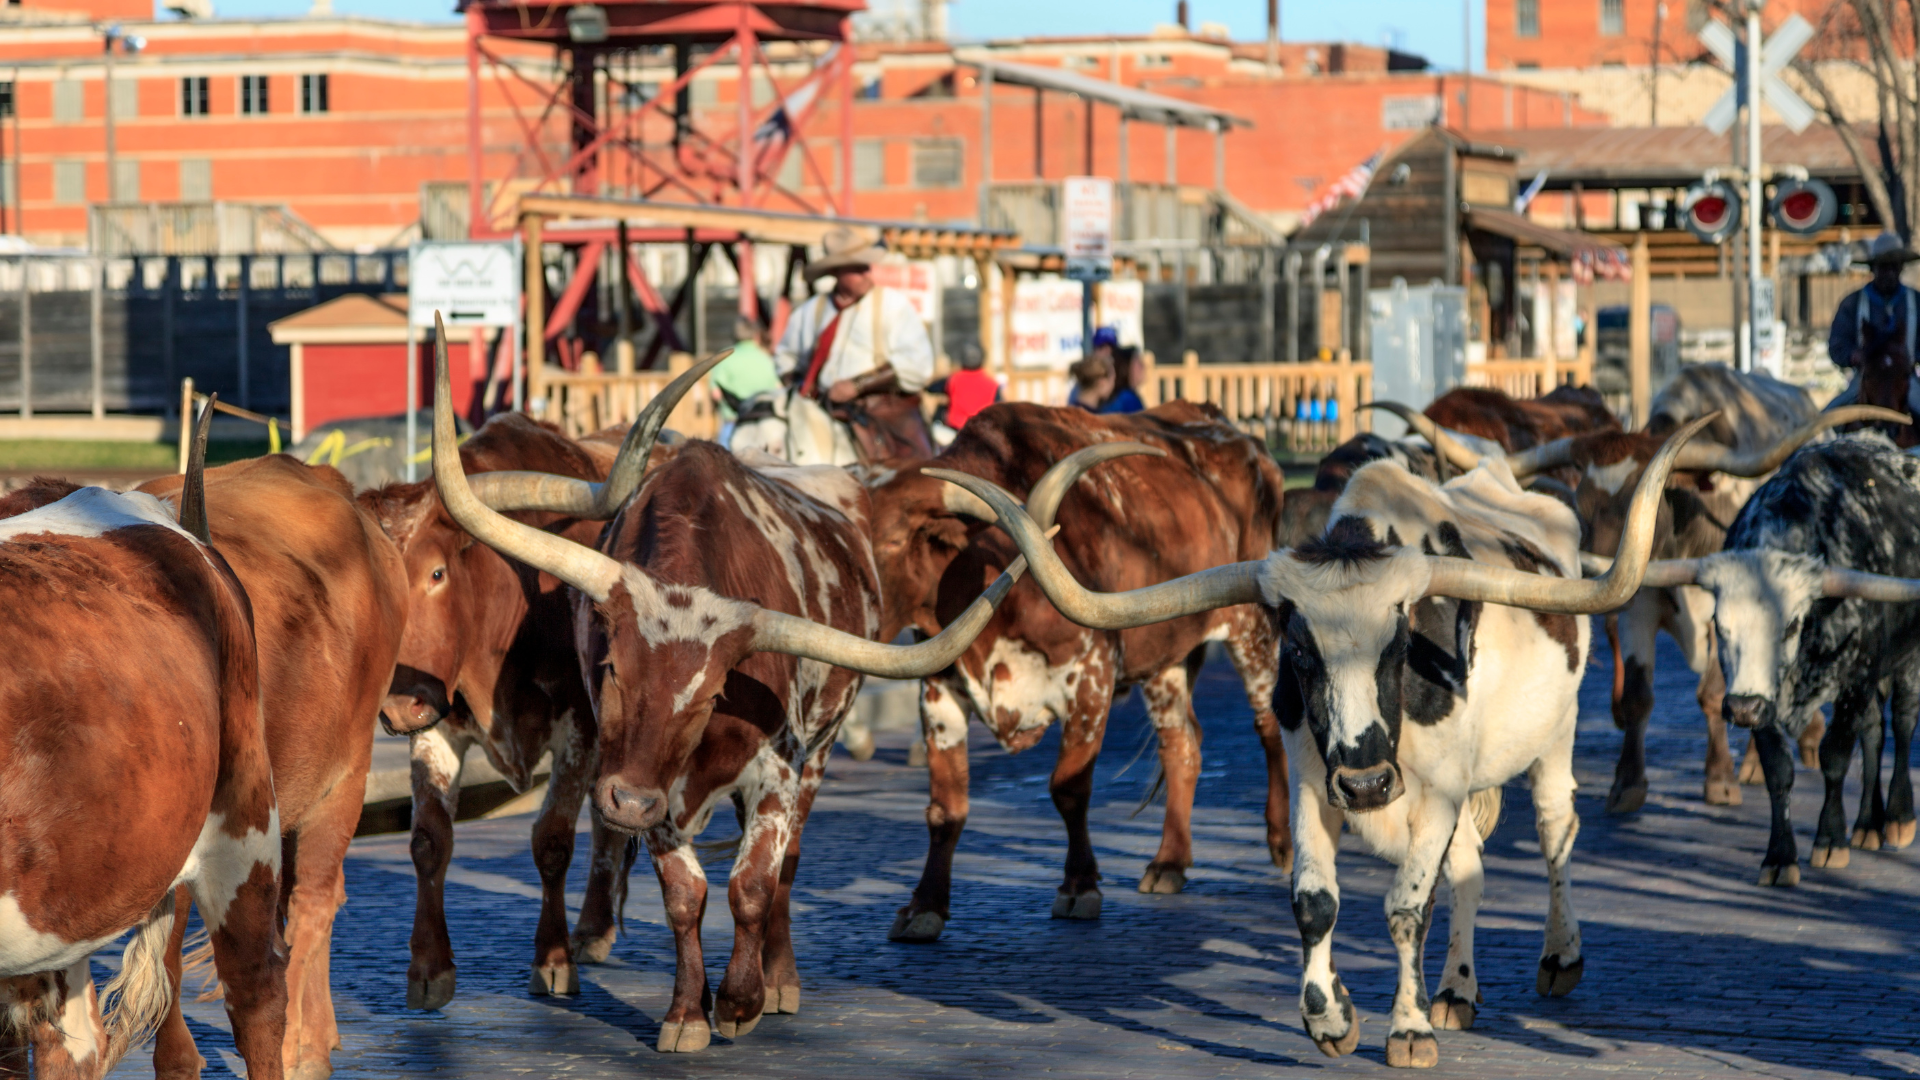 Cattle being driven down the street at the Fort Worth Stockyards